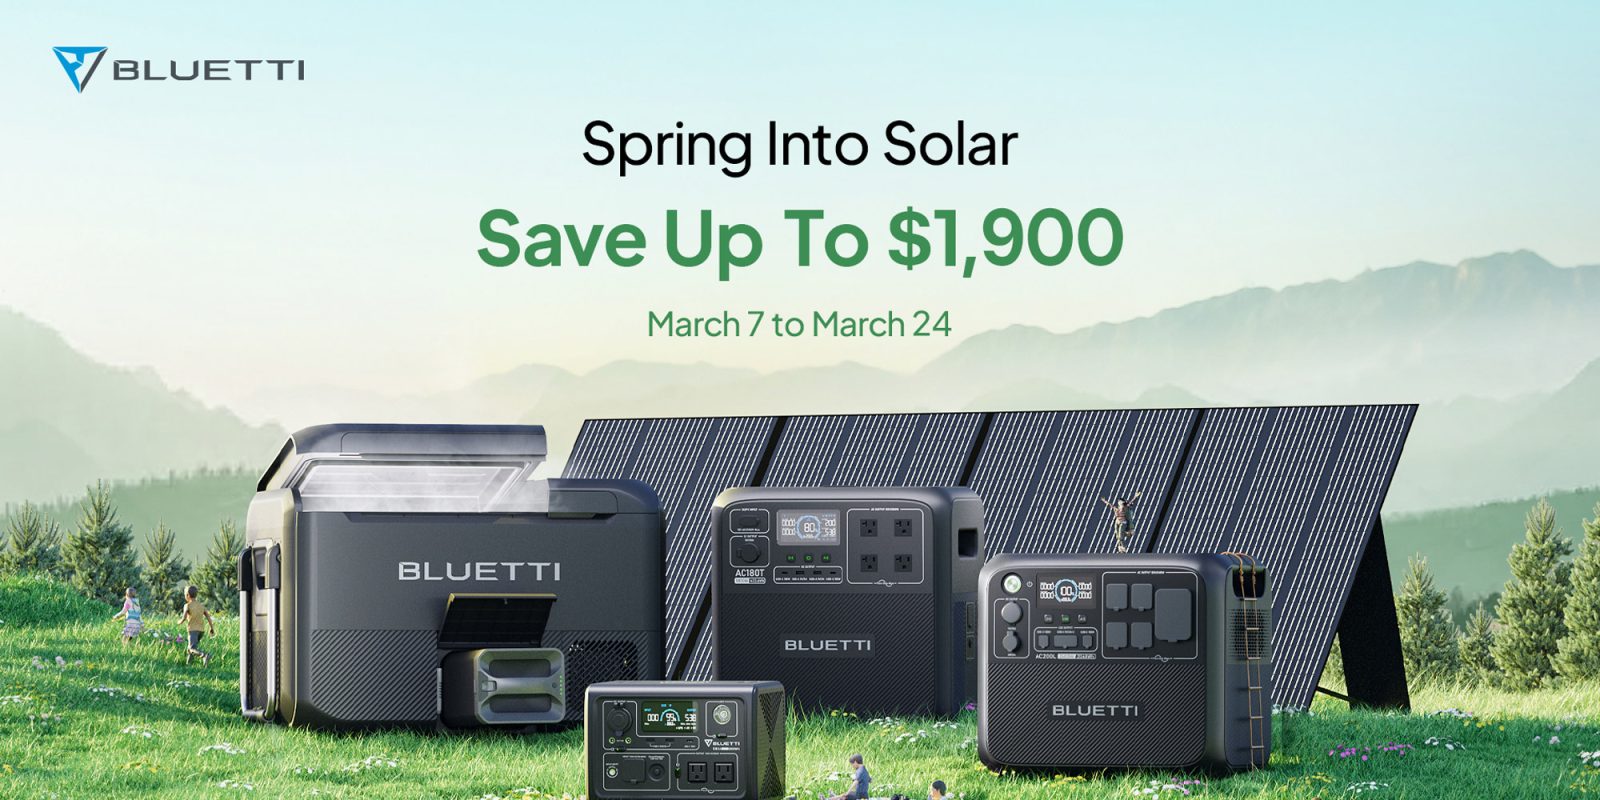 Get ready for outdoor adventures with Bluetti's spring sale on power stations